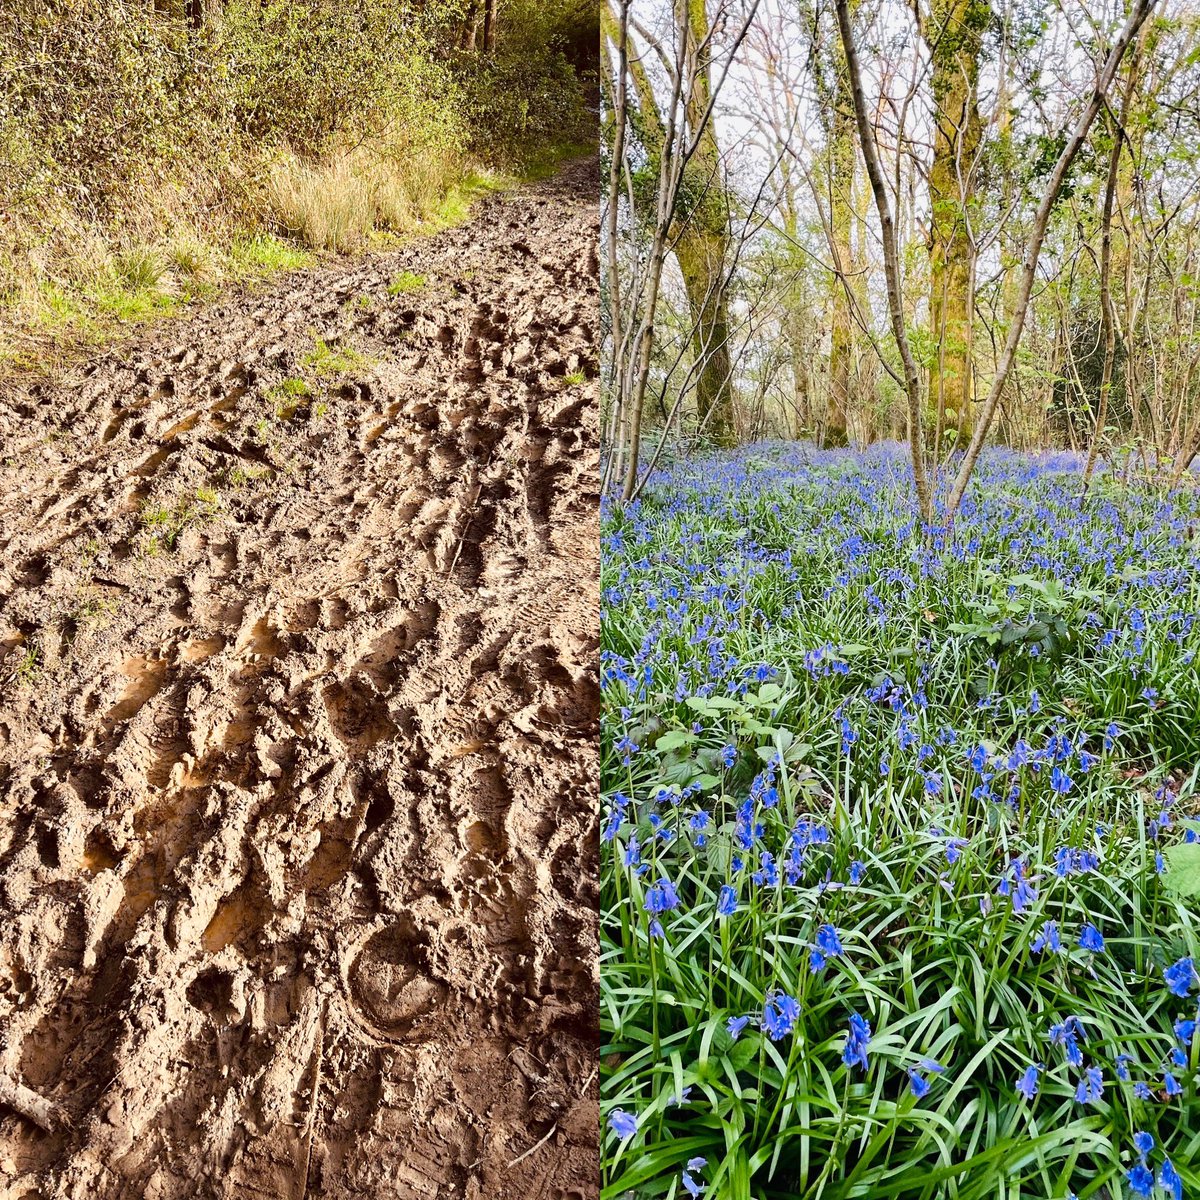 Through the mud to get to the bluebells. 

No mud, no lotus. 

~ @thichnhathanh

#thepaincoach #painriffs